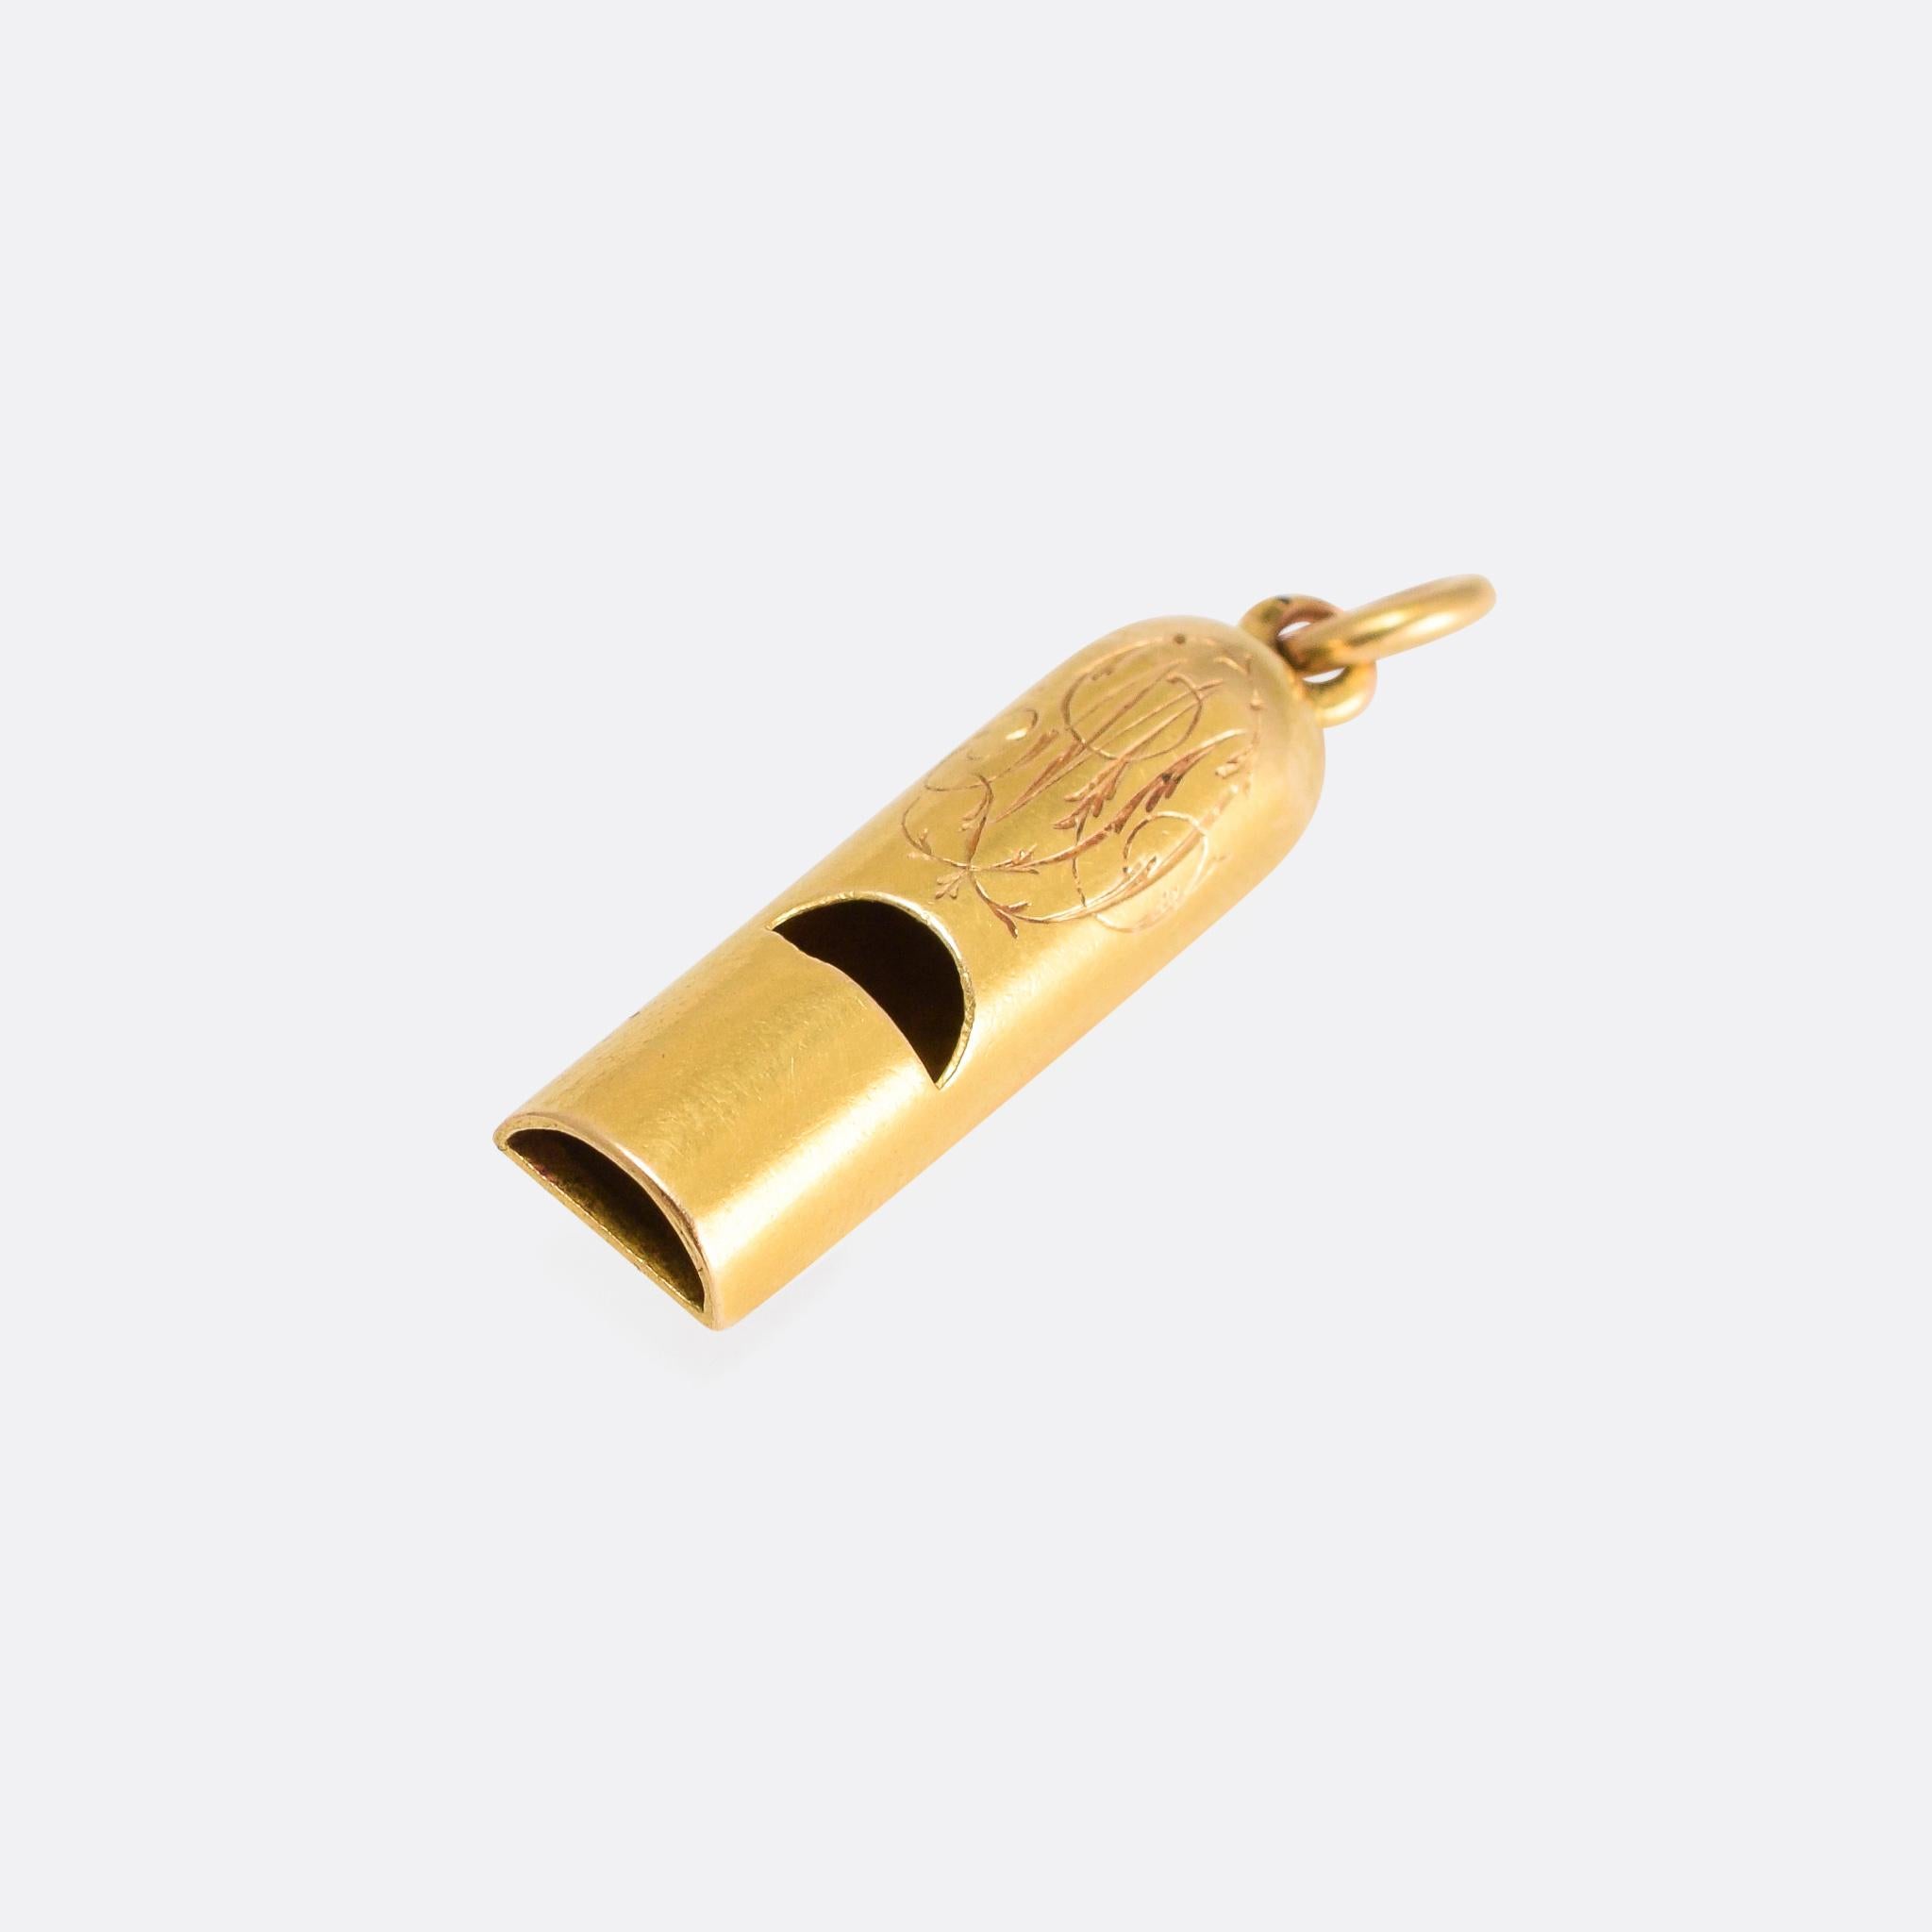 A fine antique whistle pendant, modelled in 18 karat gold. It was made in England in the late Victorian period, circa 1880, with a hand-chased monogram to the front (either DM or MD).

MEASUREMENTS 
31.5 x 8.4mm

WEIGHT 
3.3g

MARKS 
No marks